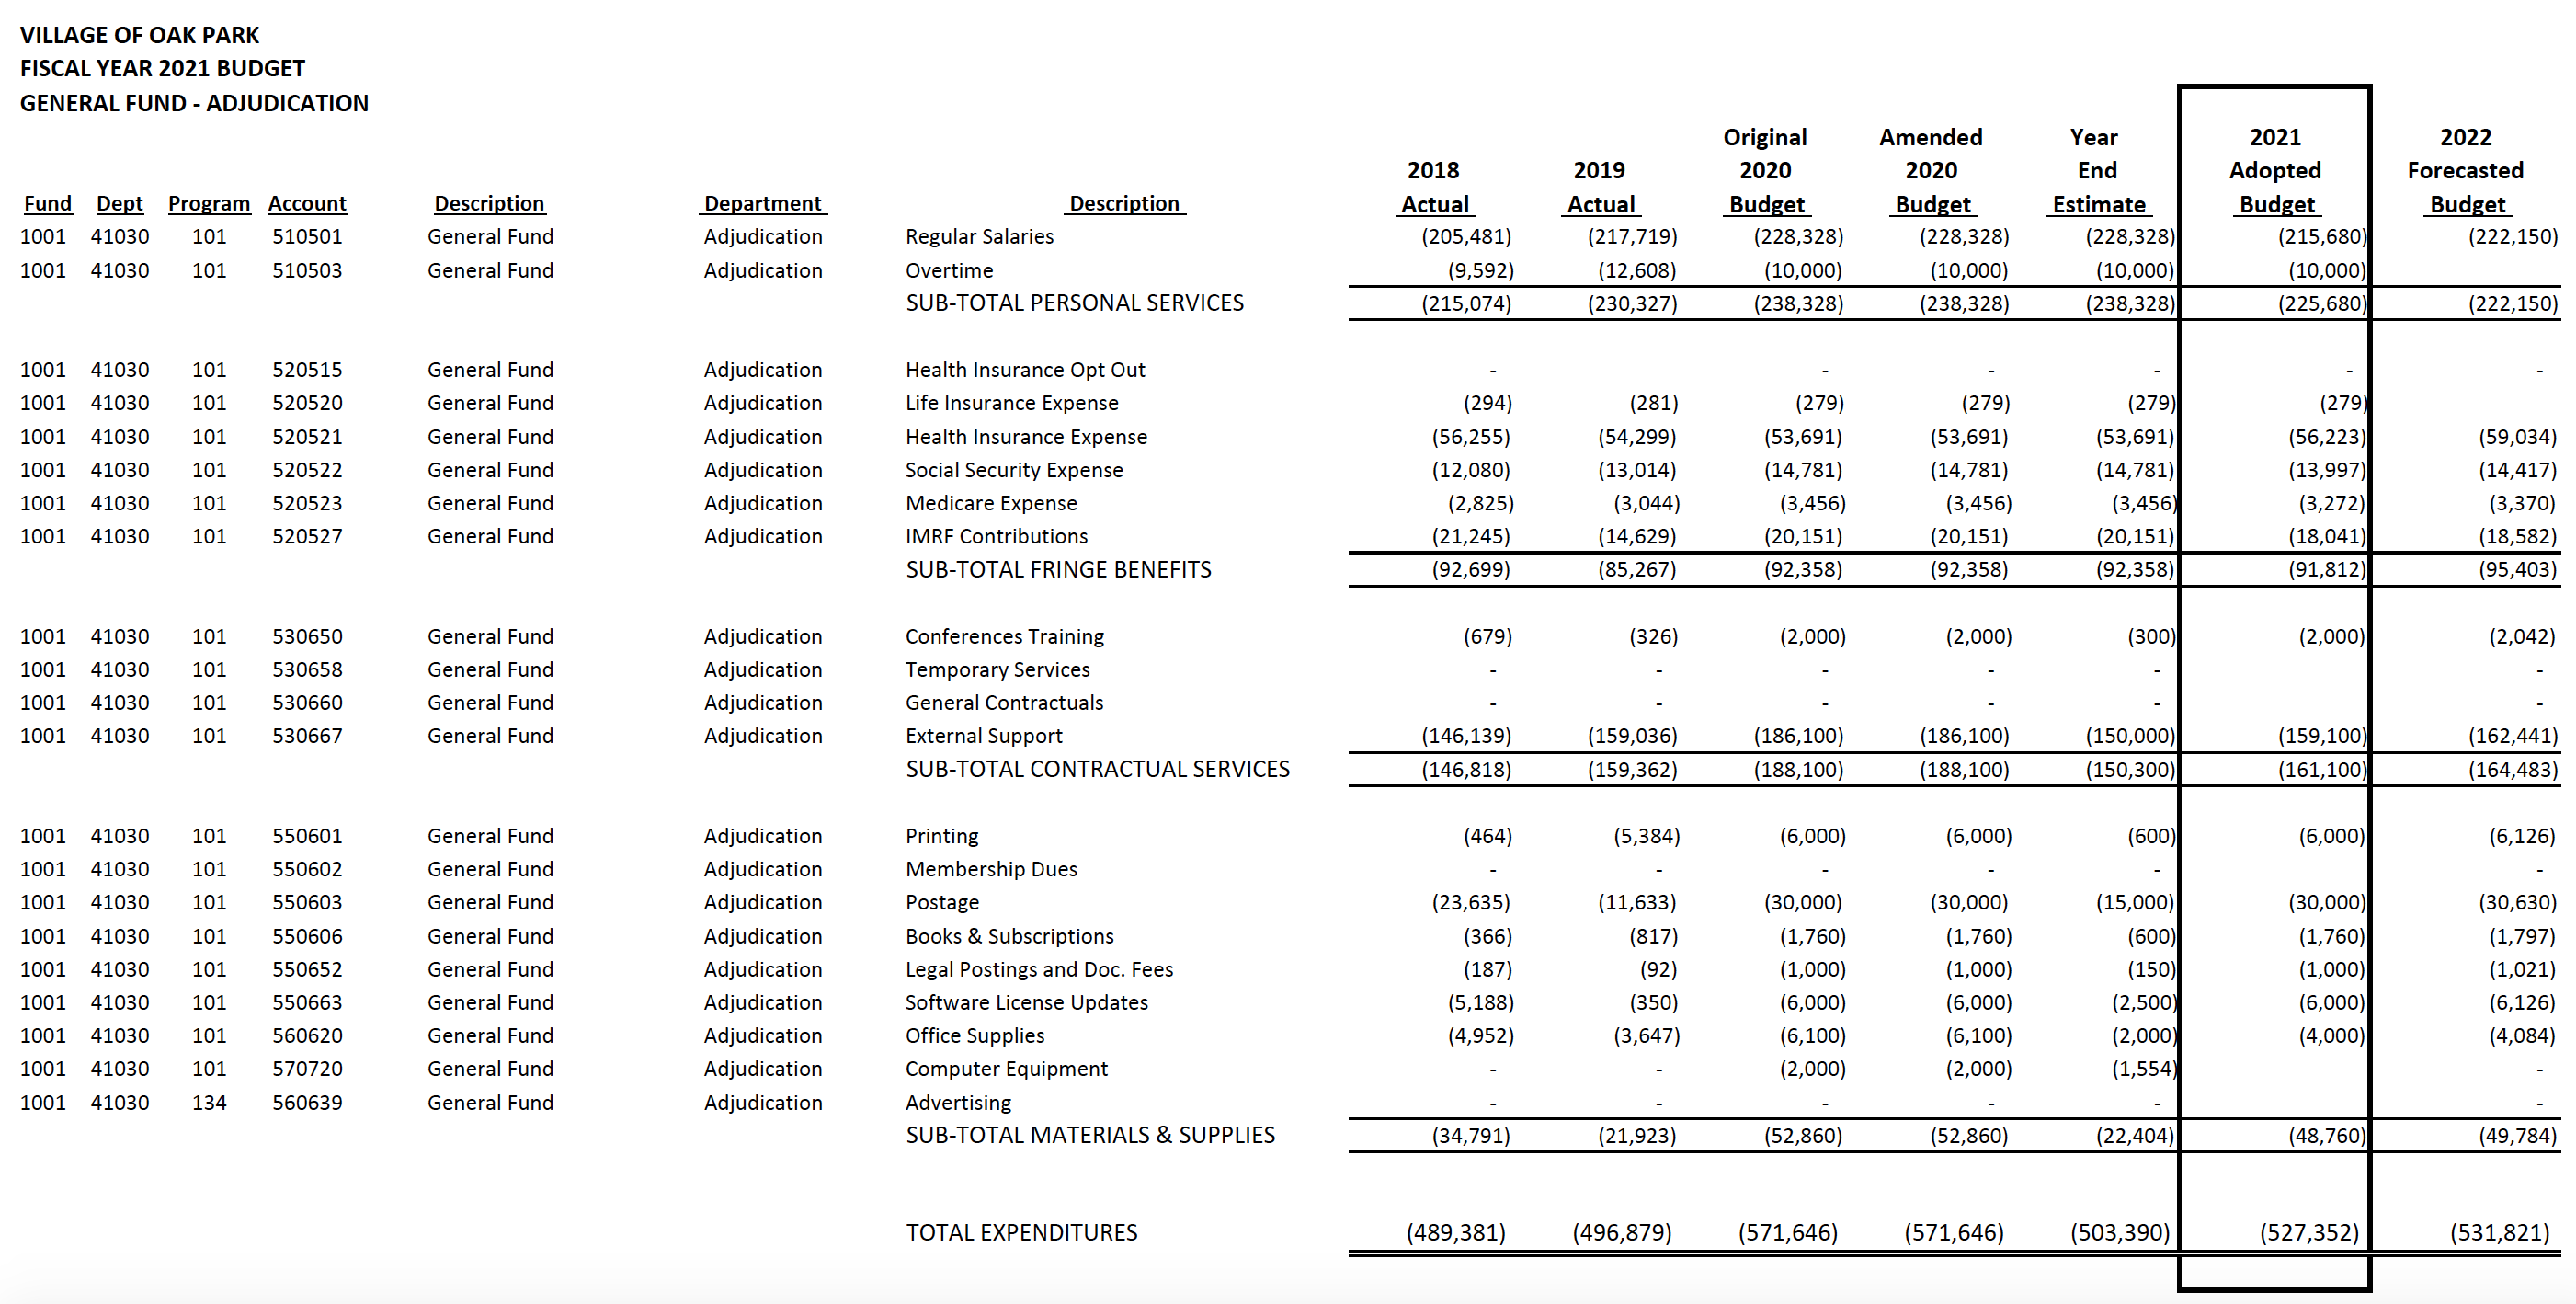 Page 70 of the Oak Park Village Fiscal Year 2021 Budget